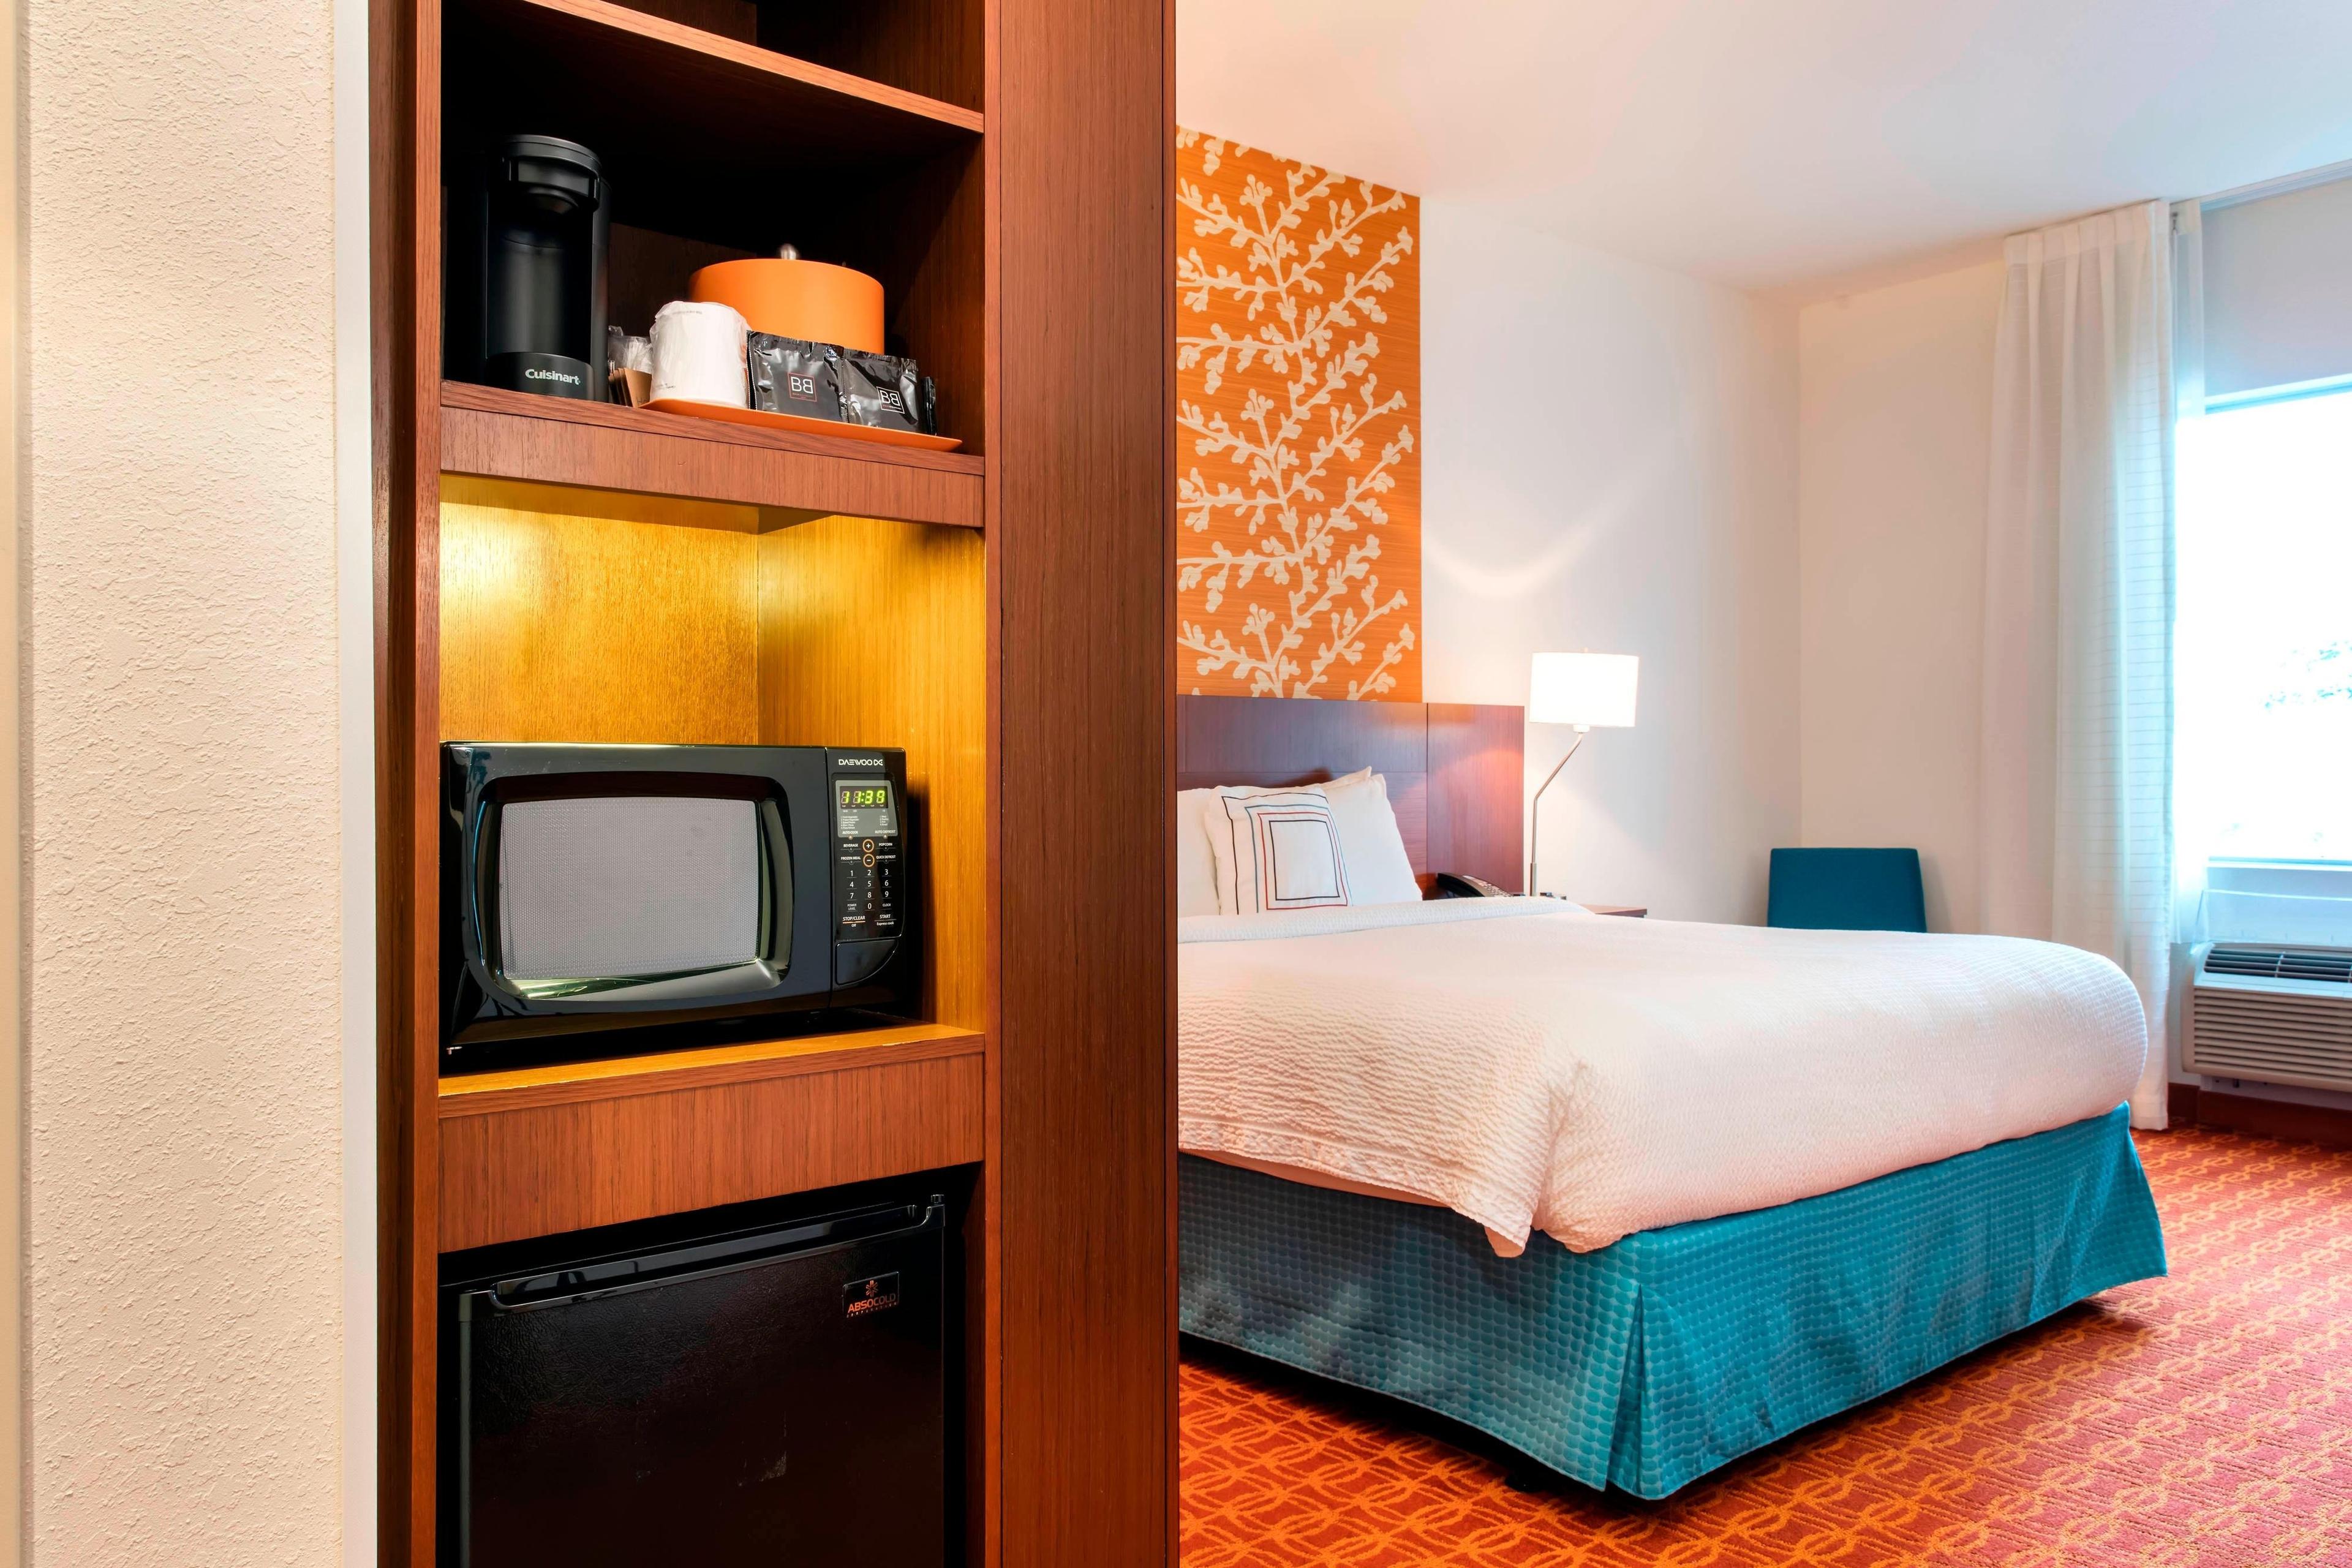 Feel right at home with our in-room mini-refrigerators, microwaves, coffee makers and luxury bedding.